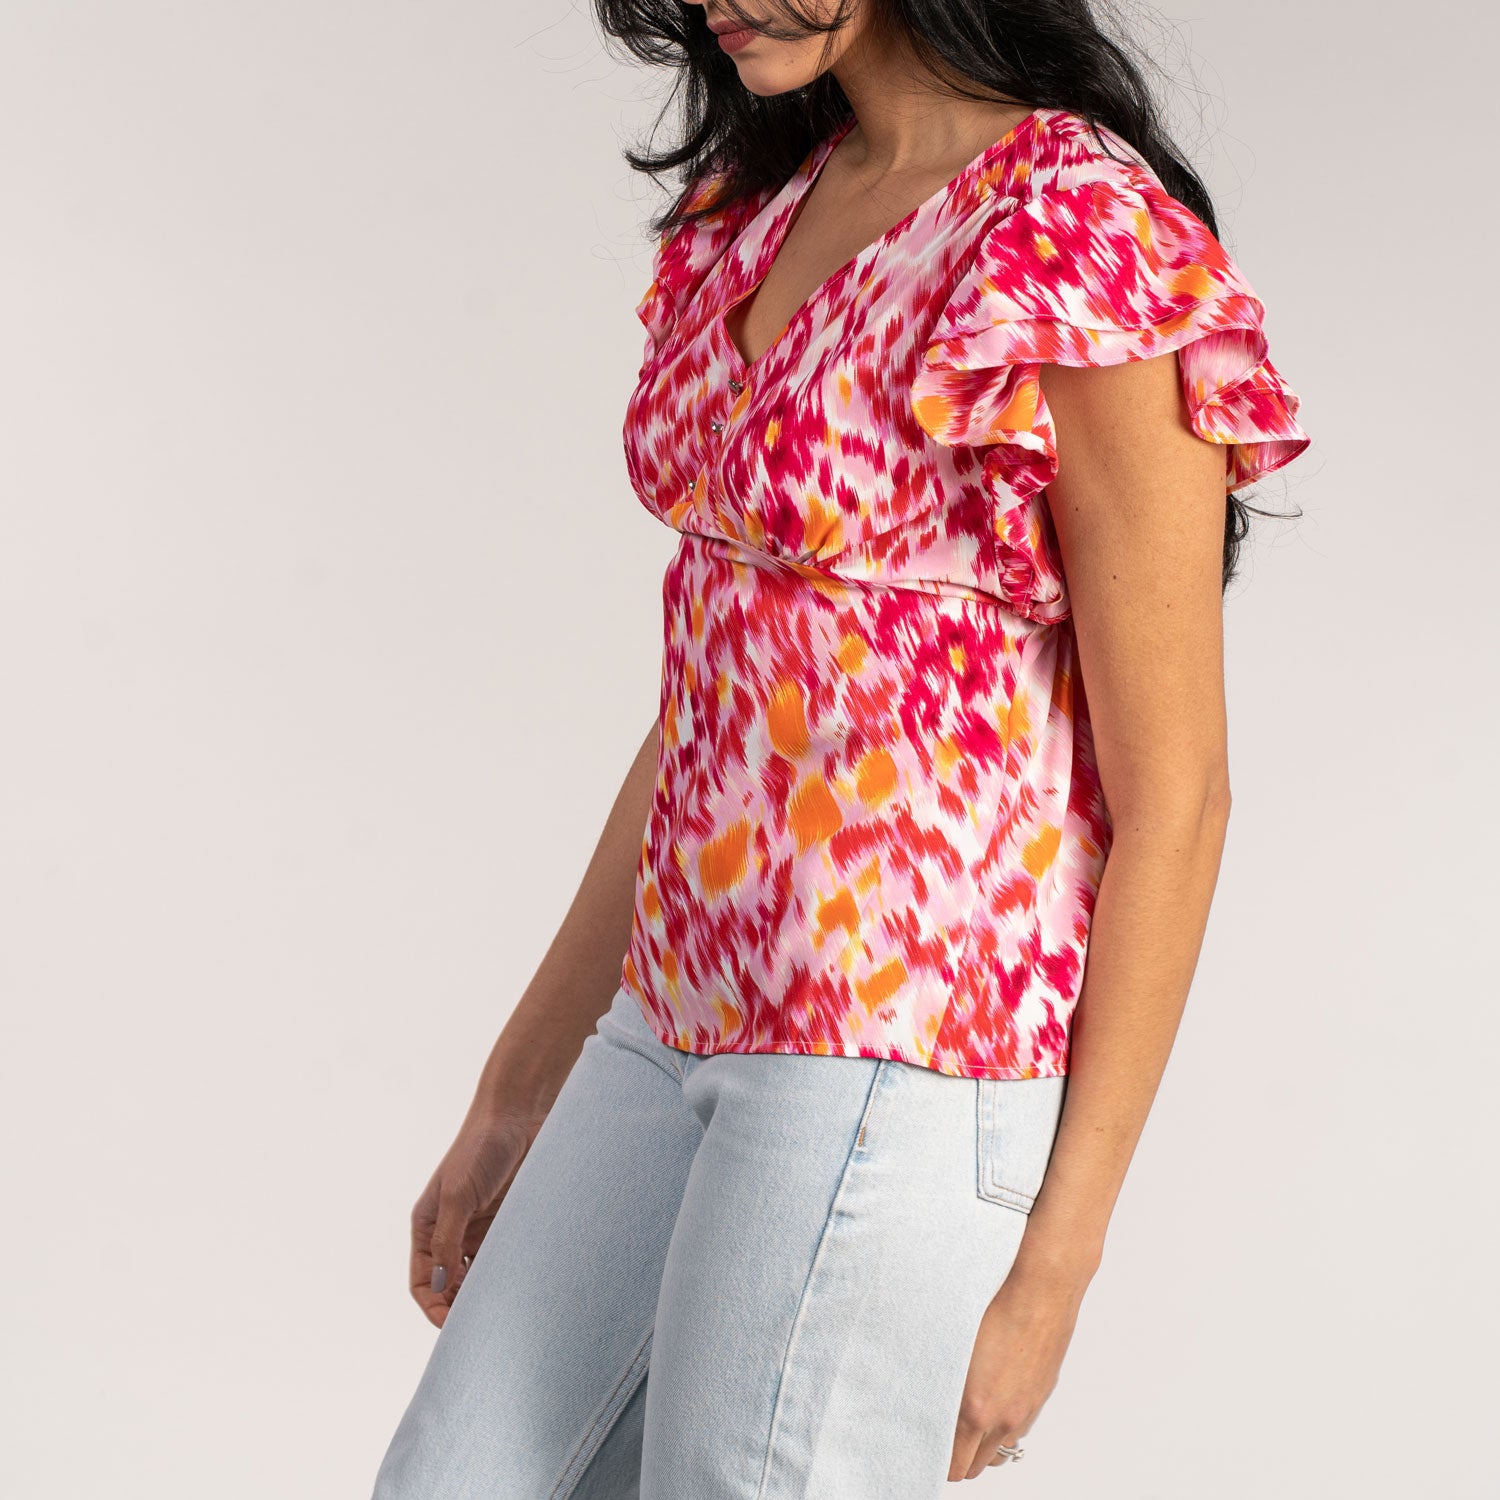 Naoise V Neck Chiffon Top - Red 4 Shaws Department Stores